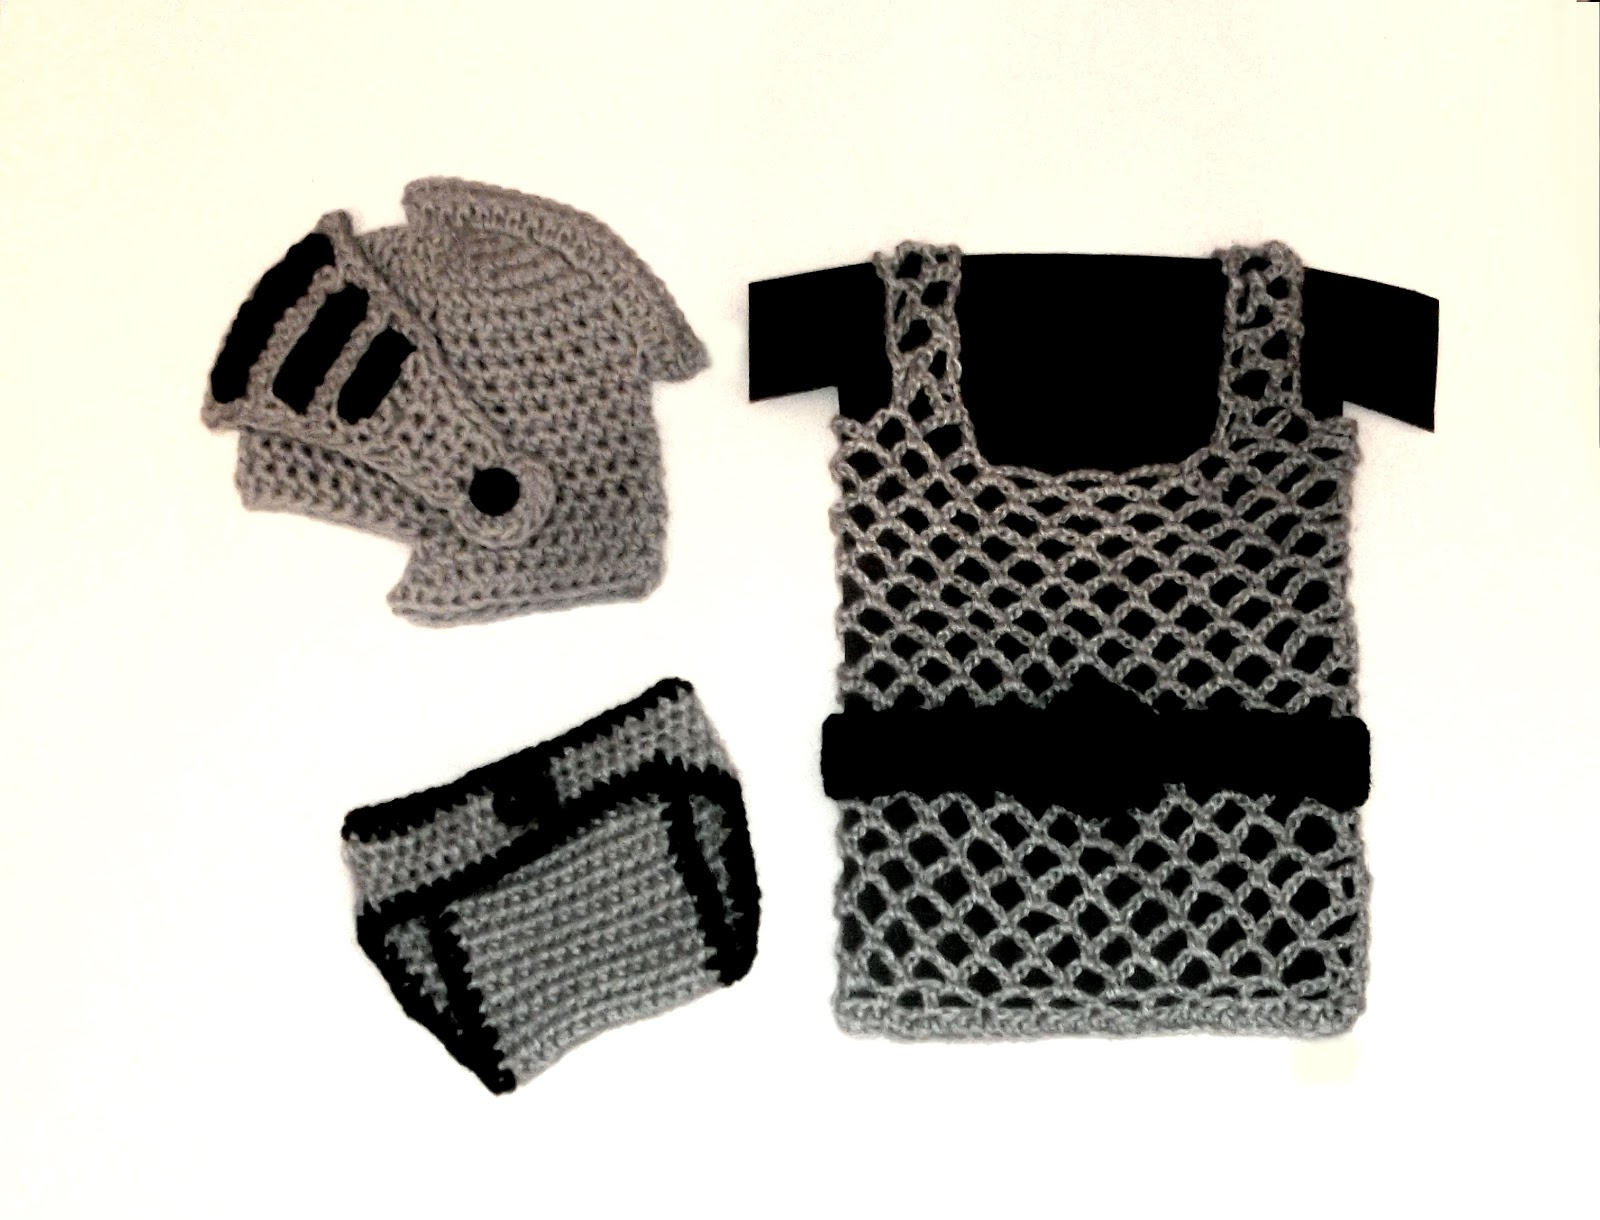 Chainmail Crochet Pattern Cute Designs Knight Helmet Diaper Cover Chainmail Vest Crochet